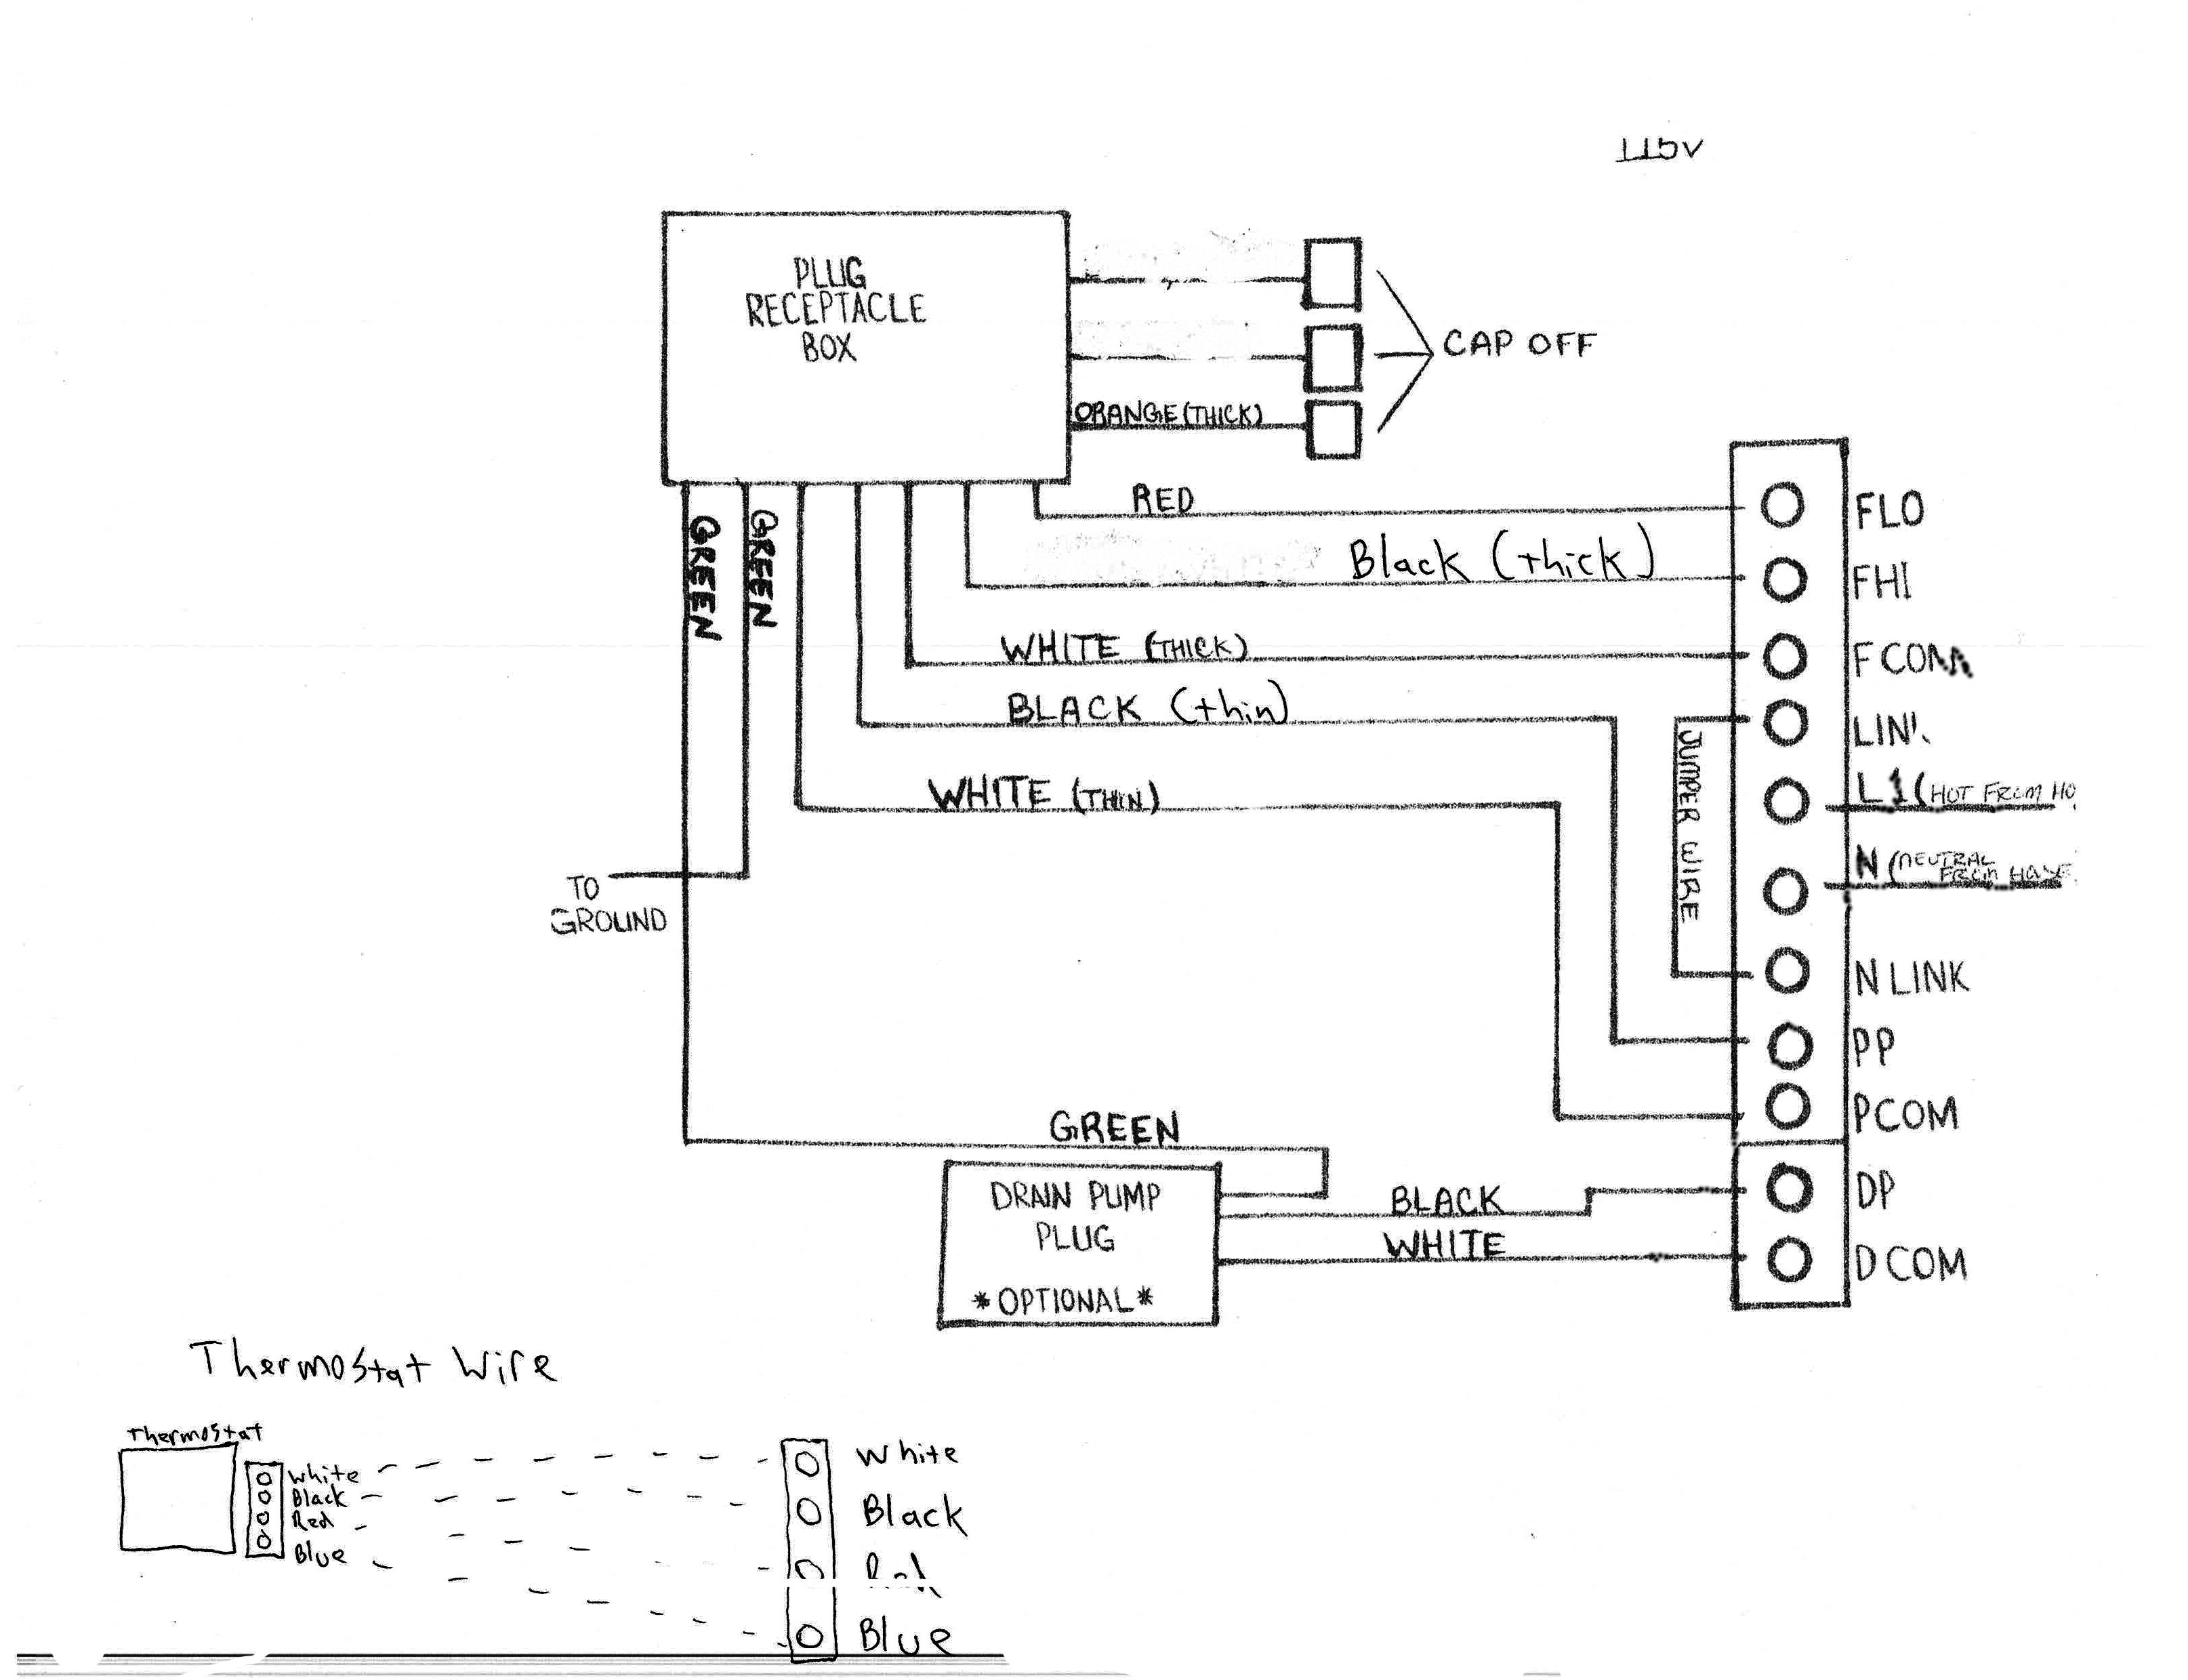 Part 141 Wiring Circuit Drawings are Useful when Working Wiring Wiring Diagram Motor Control Swamp Cooler